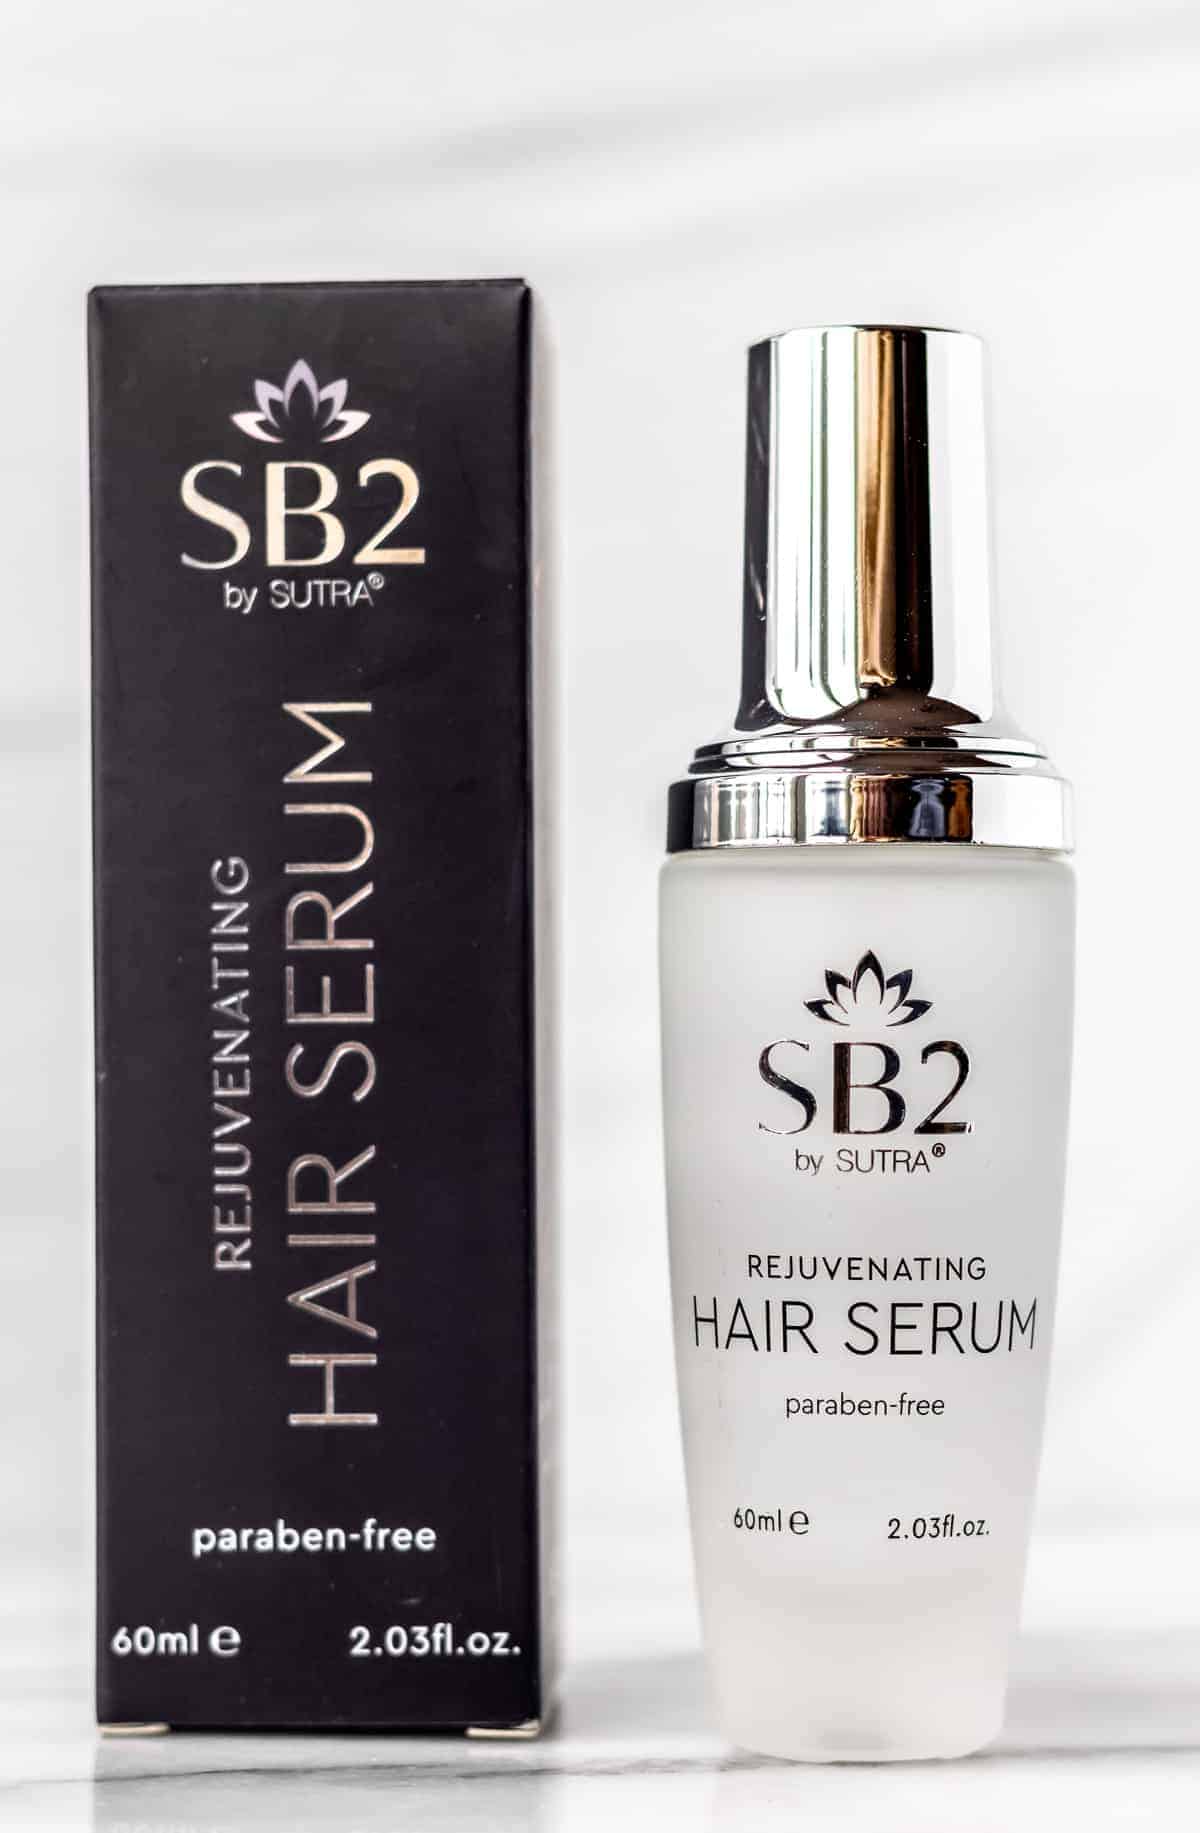 Sutra Beauty Rejuvenating Hair Serum bottle and box on a white background.